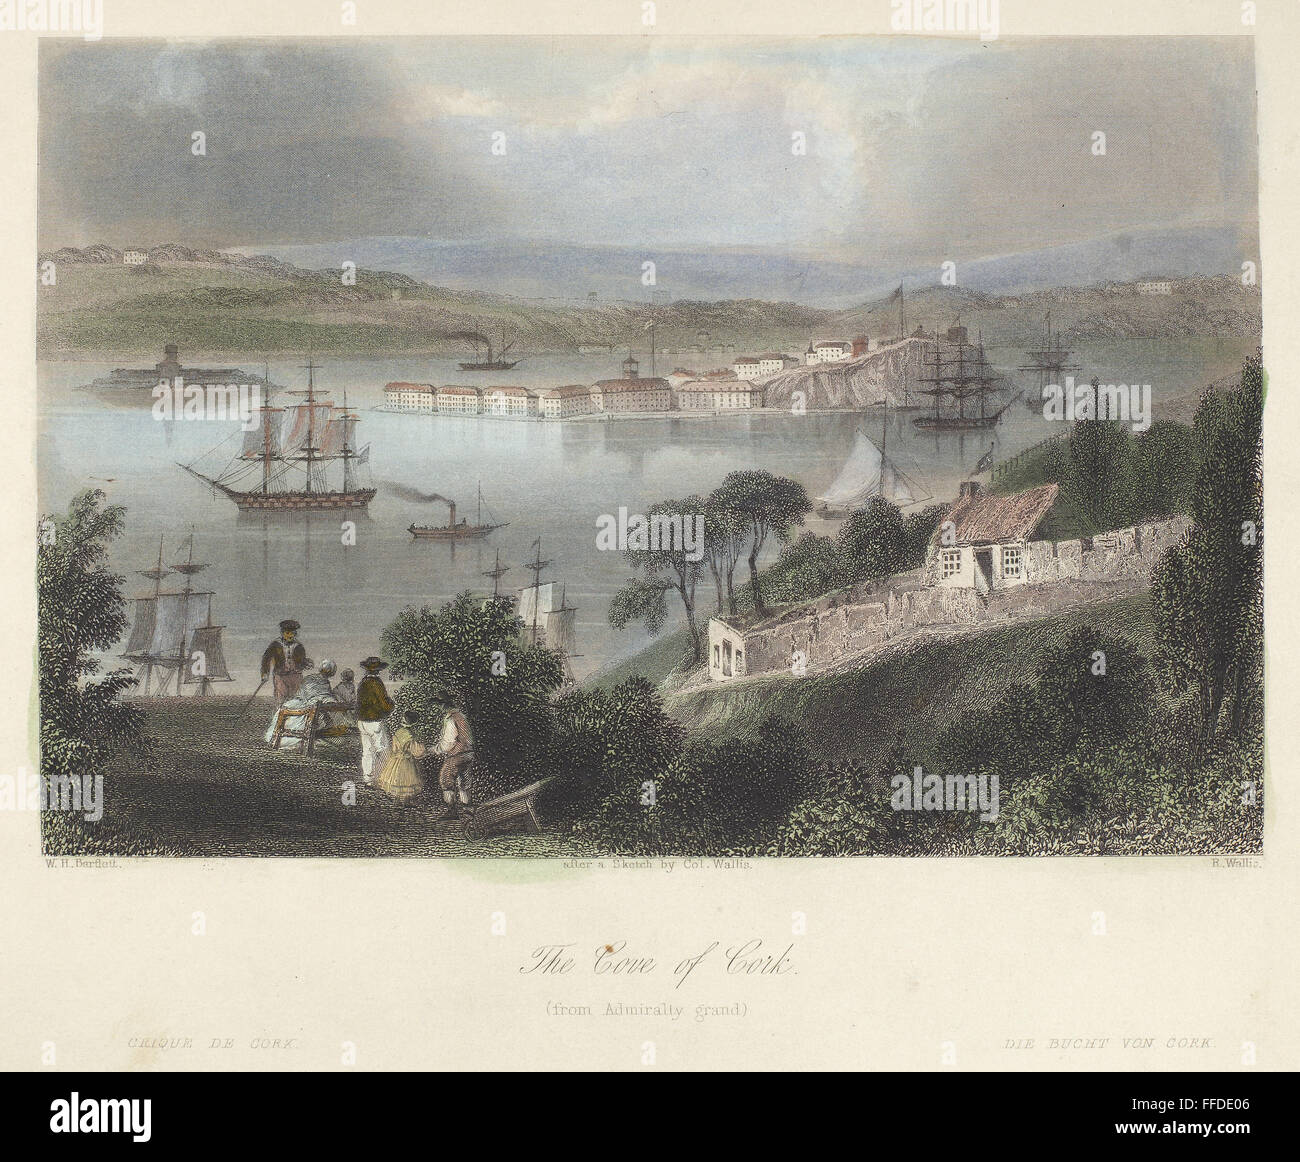 IRELAND: COVE OF CORK. /nView of the Cove of Cork (also known as Queenstown, or Cobh) in Cork Harbor, Ireland. Steel engraving, English, c1840, after William Henry Bartlett. Stock Photo